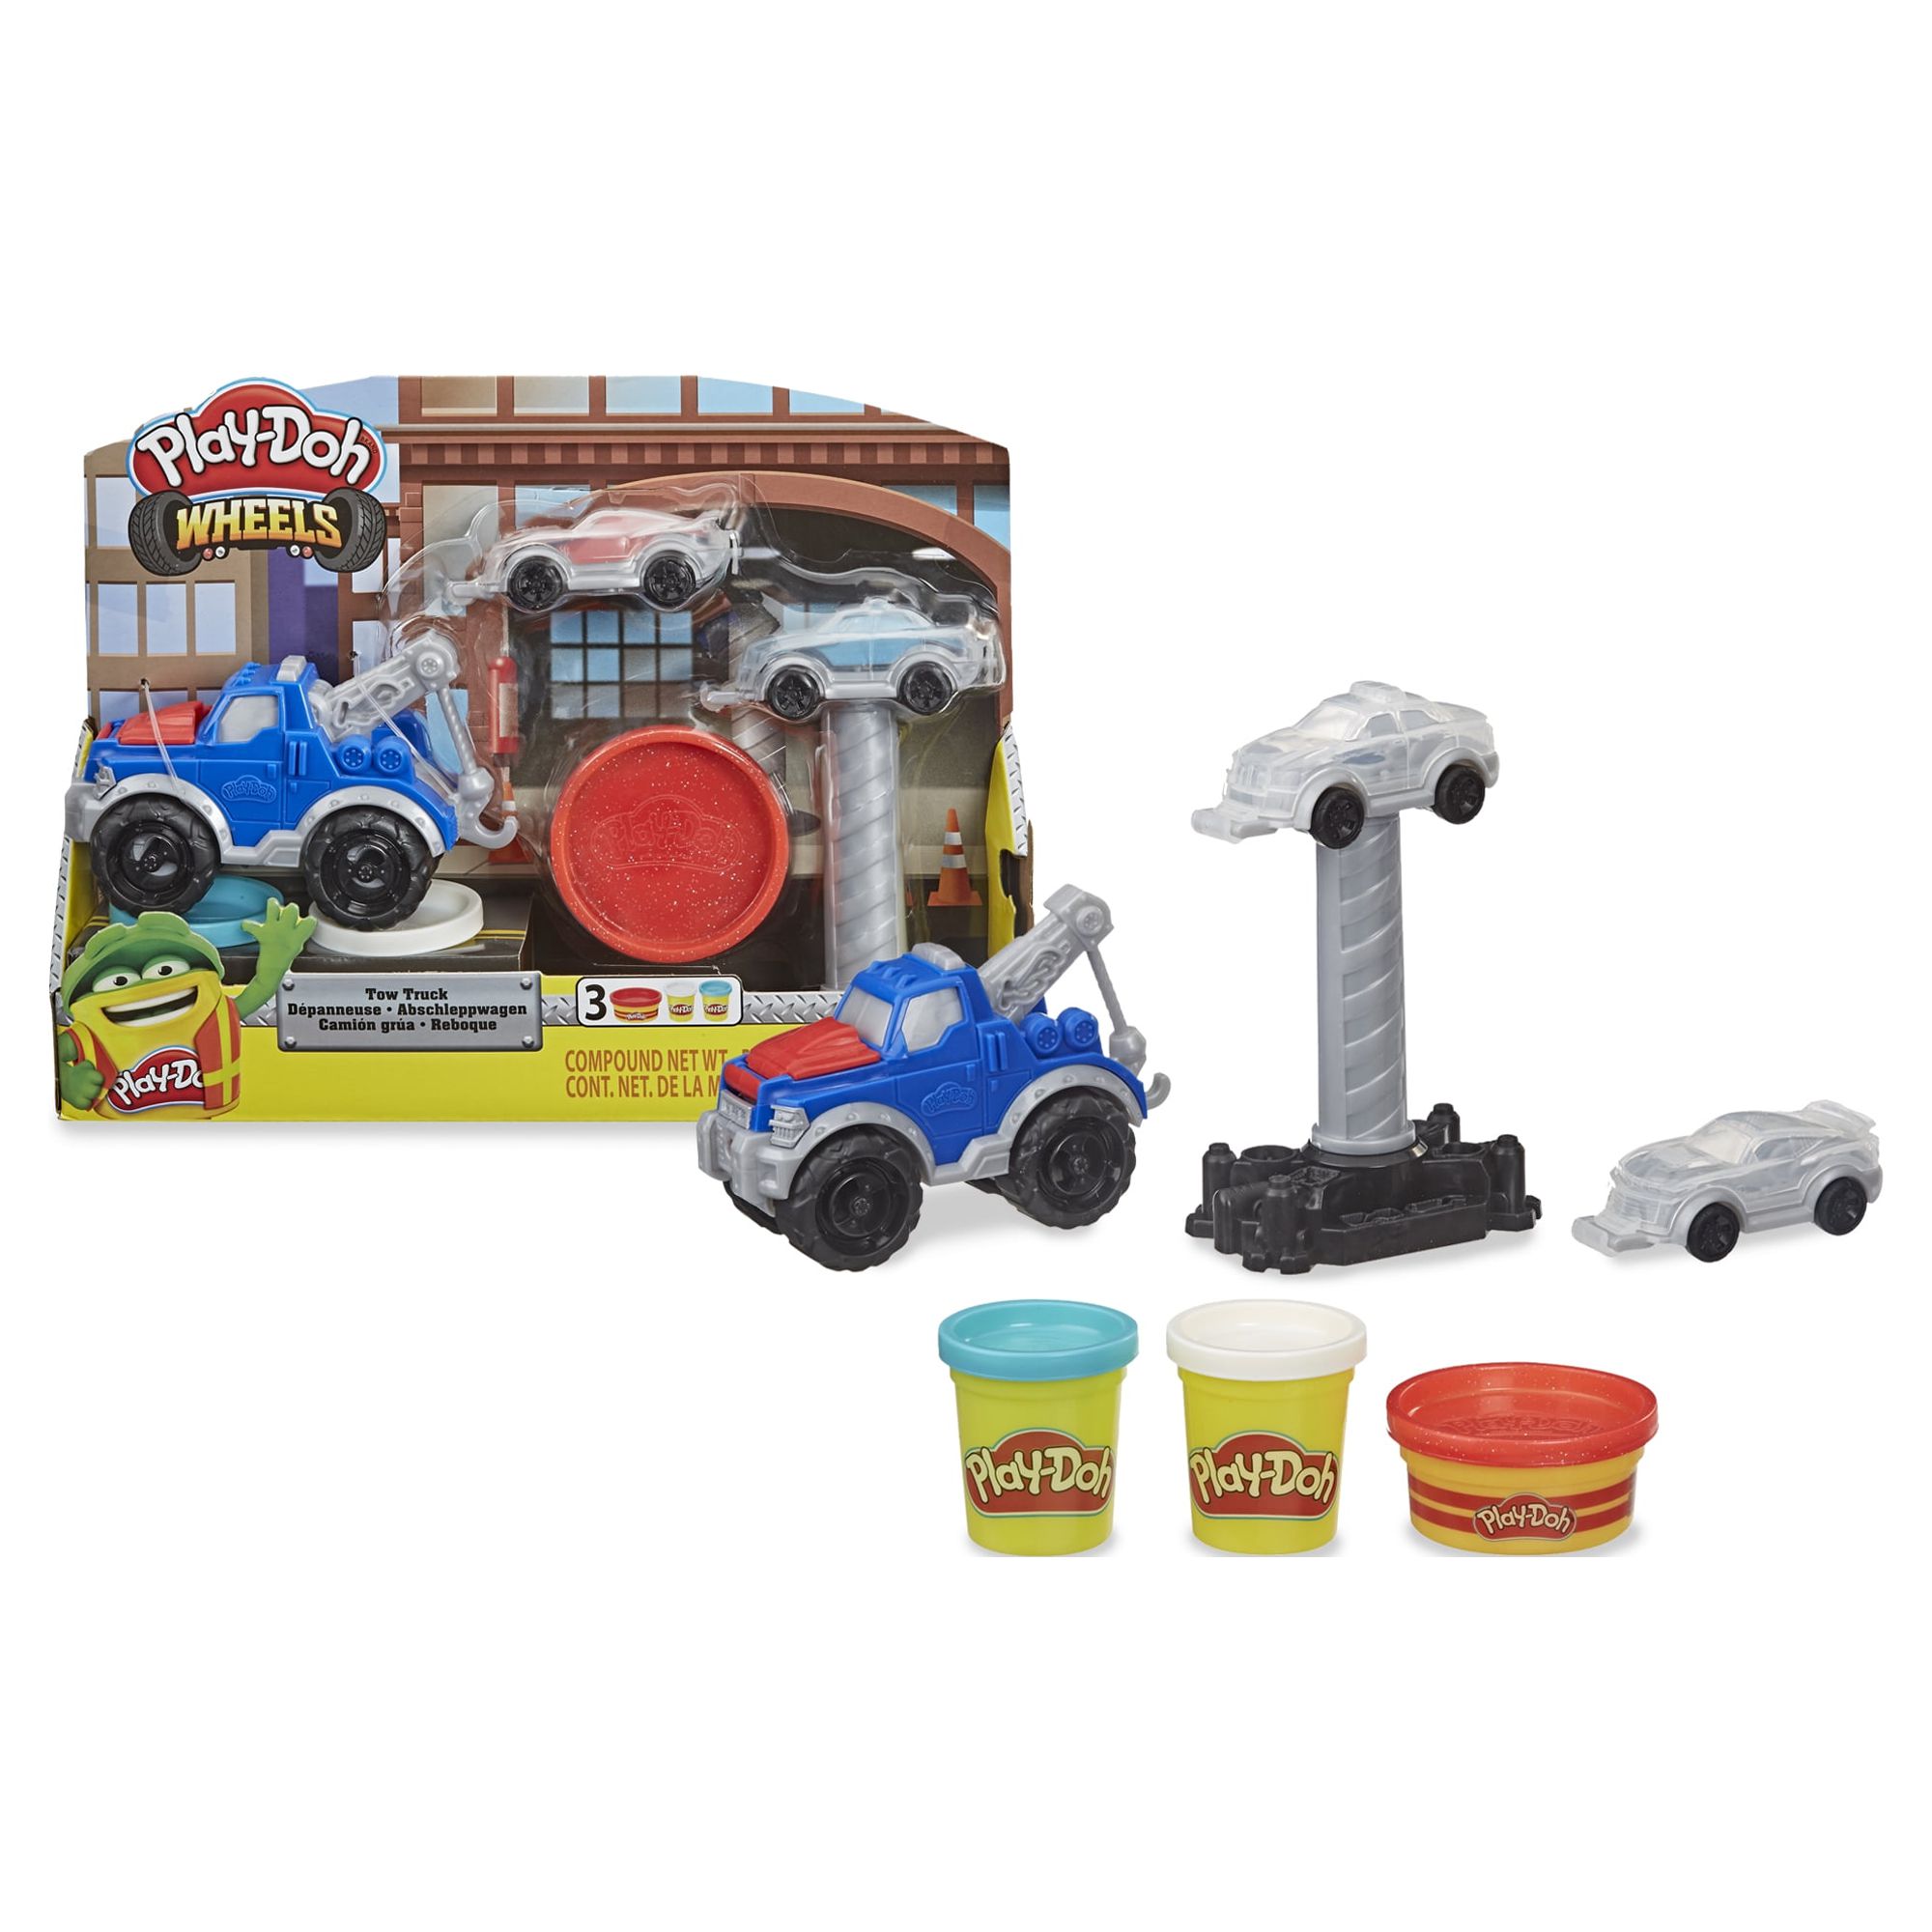 Play-Doh Wheels Tow Truck Toy with 3 Non-Toxic Play-Doh Colors, (6 oz) - image 1 of 14